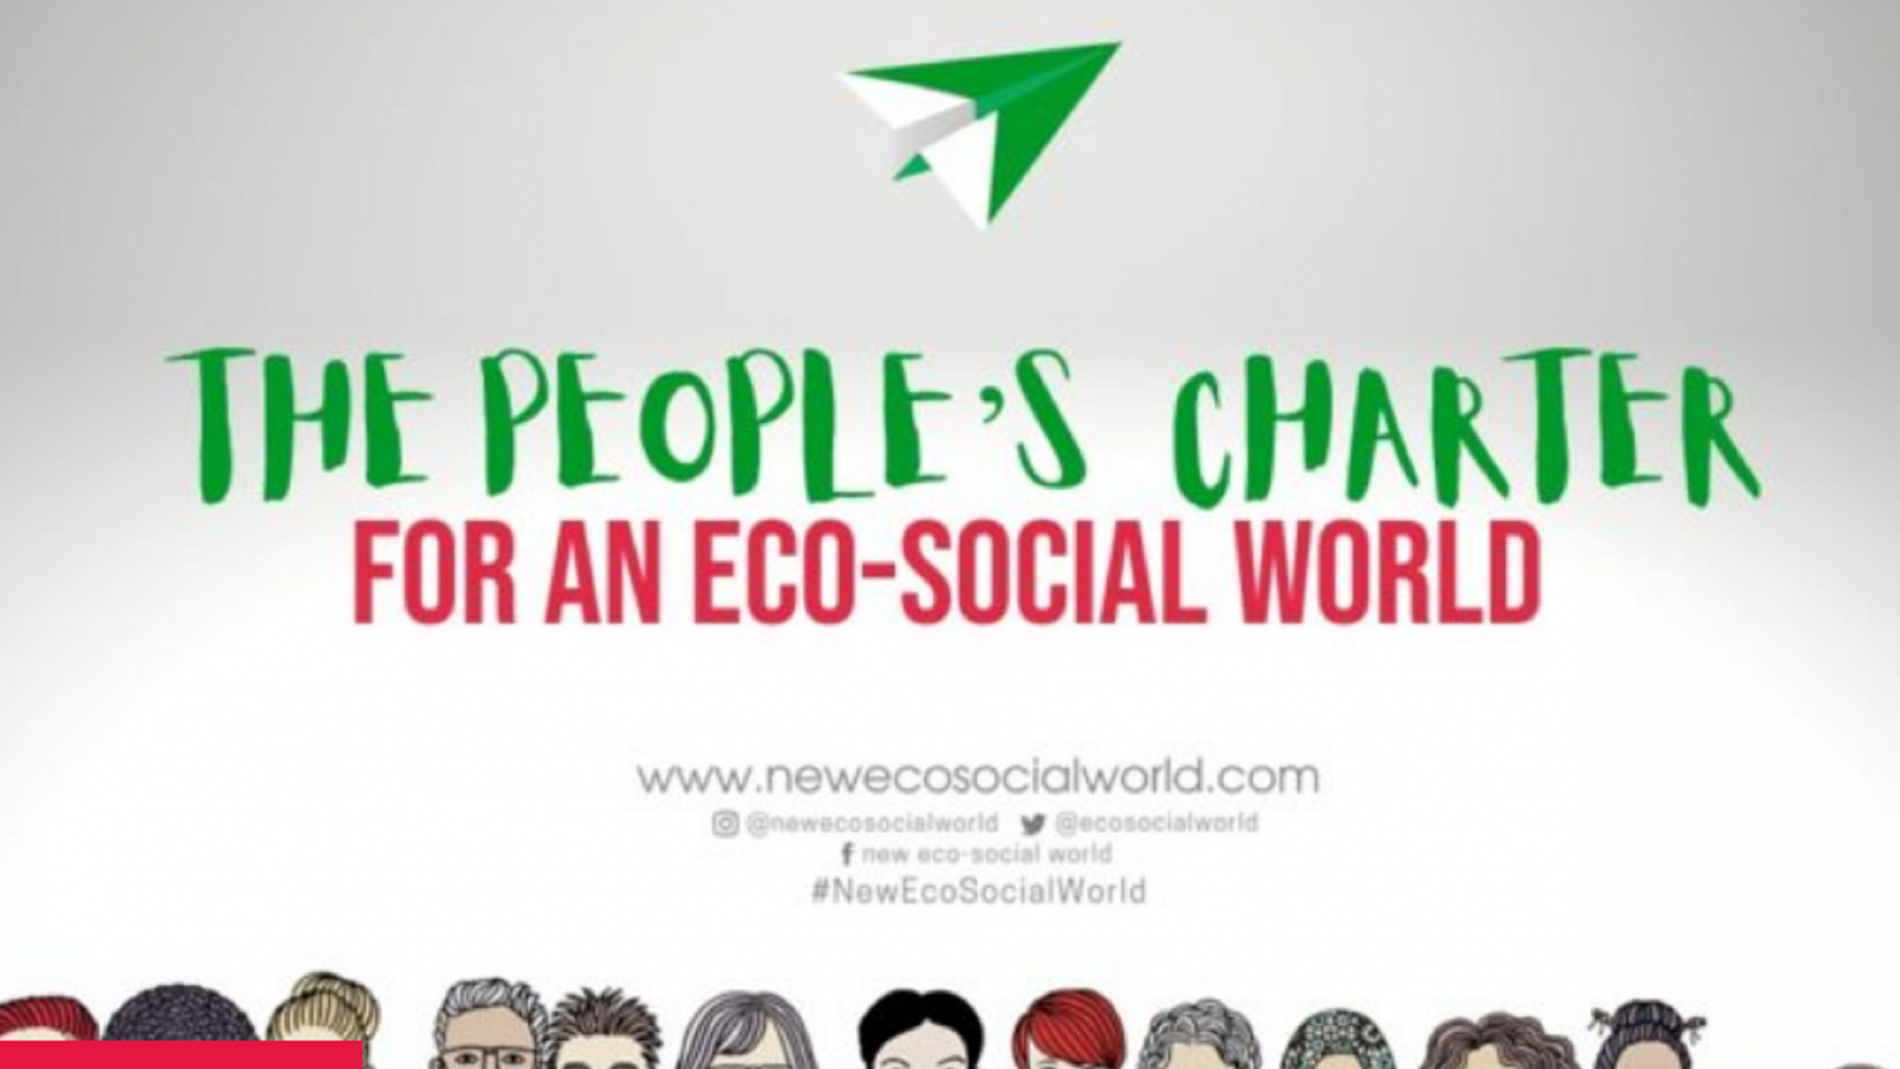 The People's charter for an eco-social world